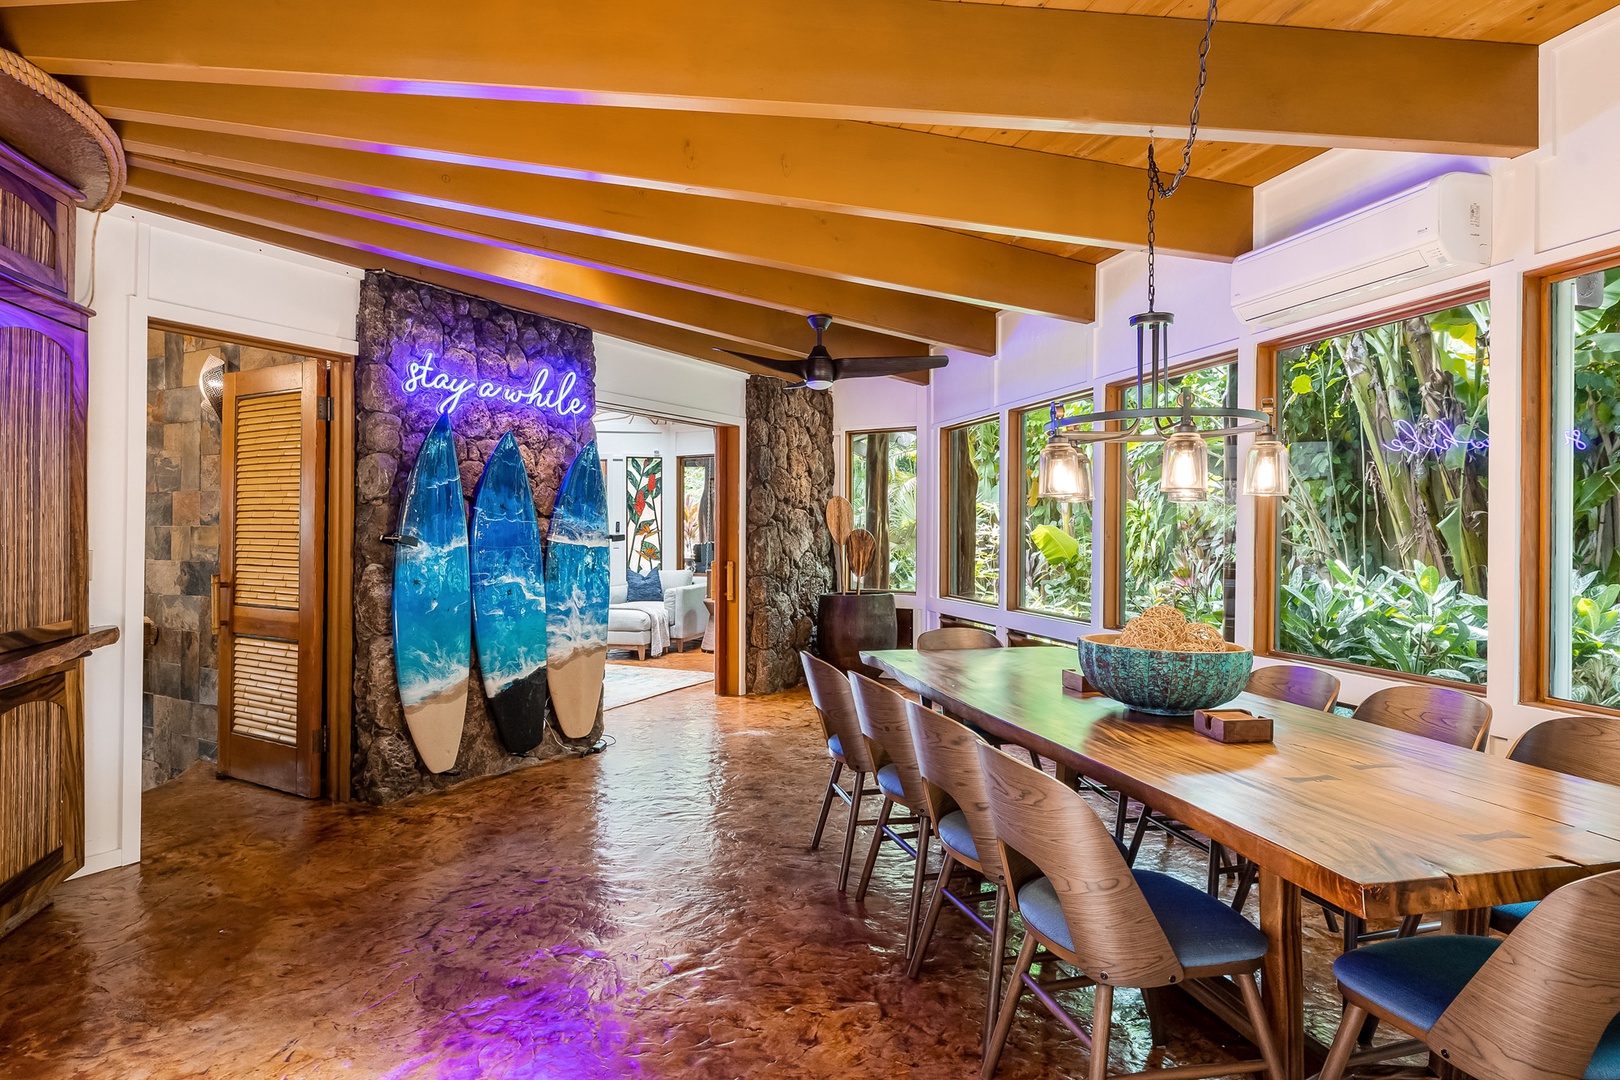 Waimanalo Vacation Rentals, Hawaii Hobbit House - Dining area opens to main living area and kitchen